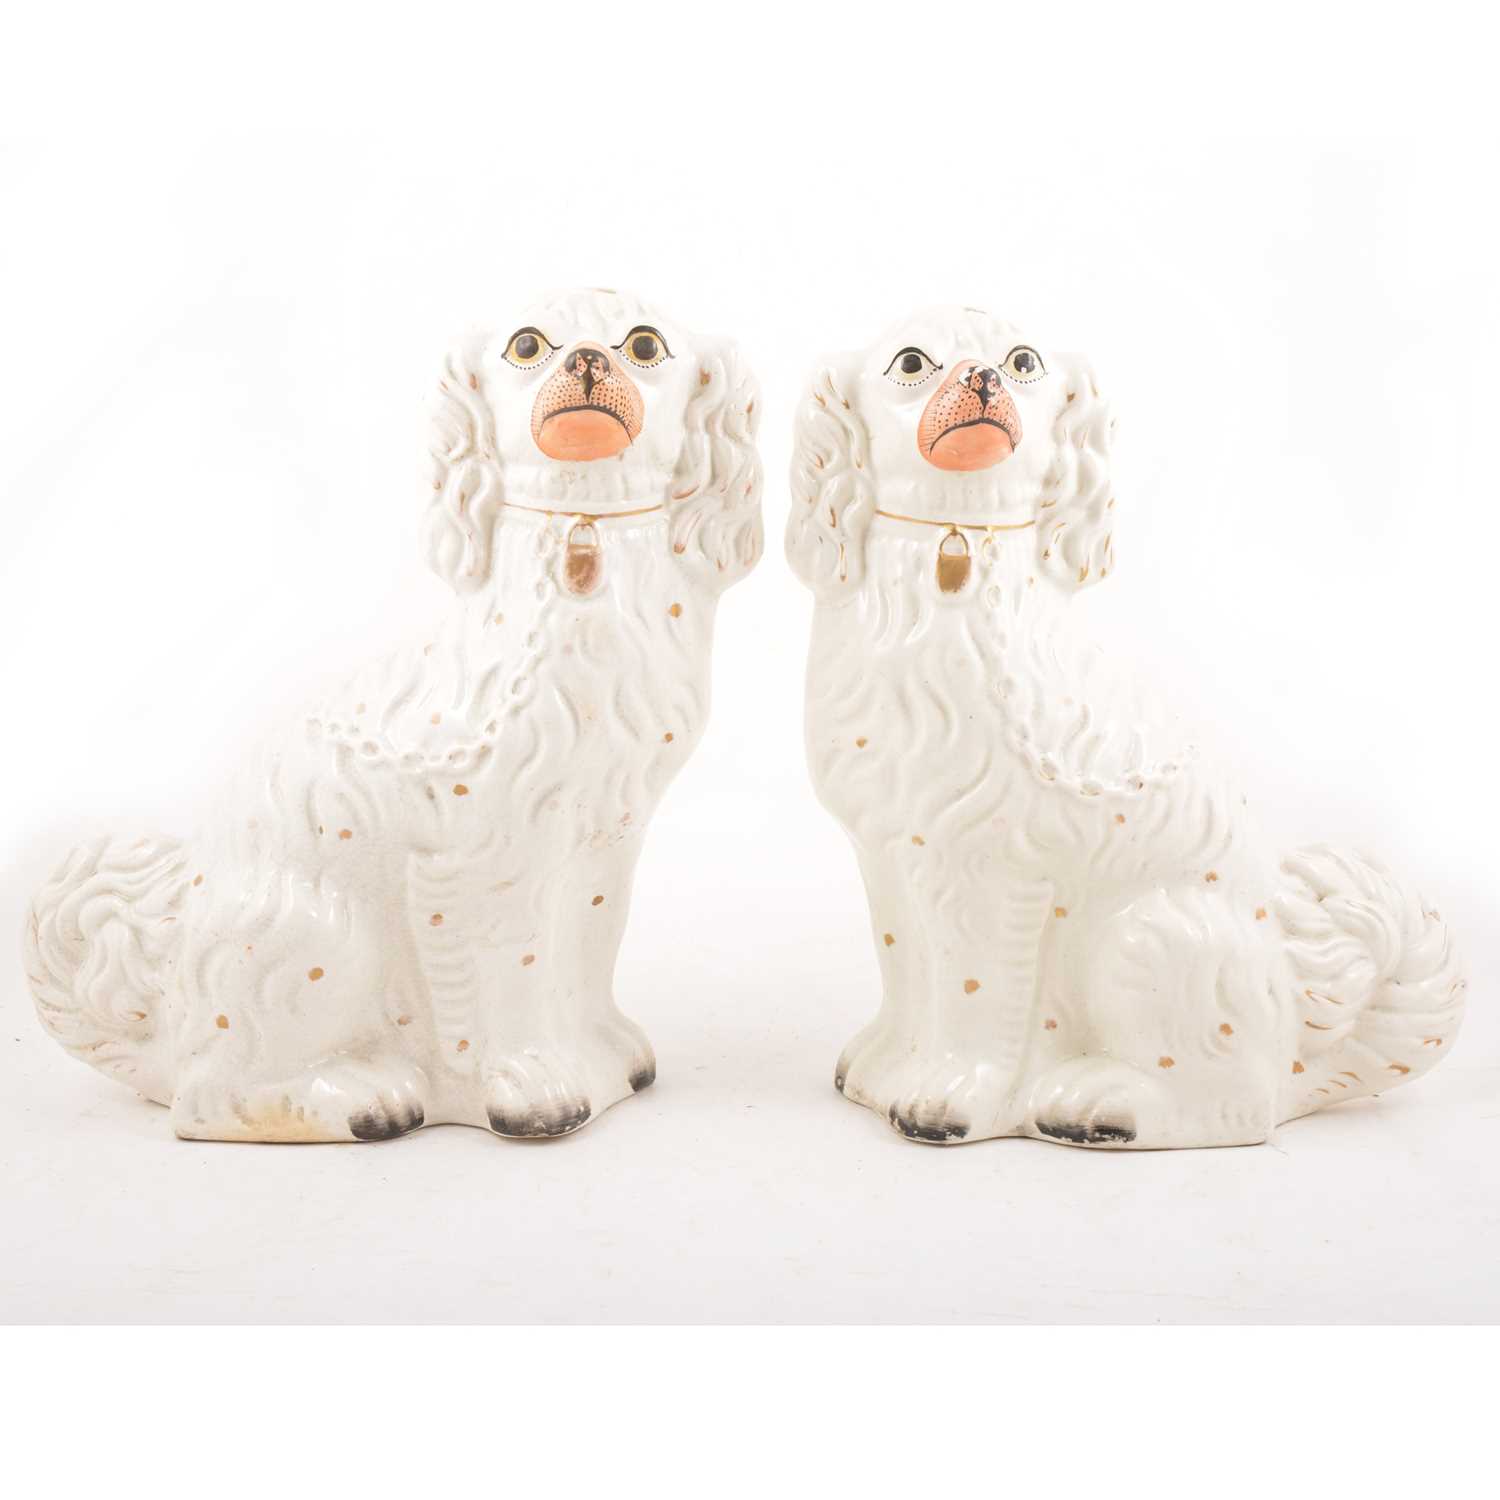 Lot 29 - Pair of large Staffordshire King Charles Spaniels.